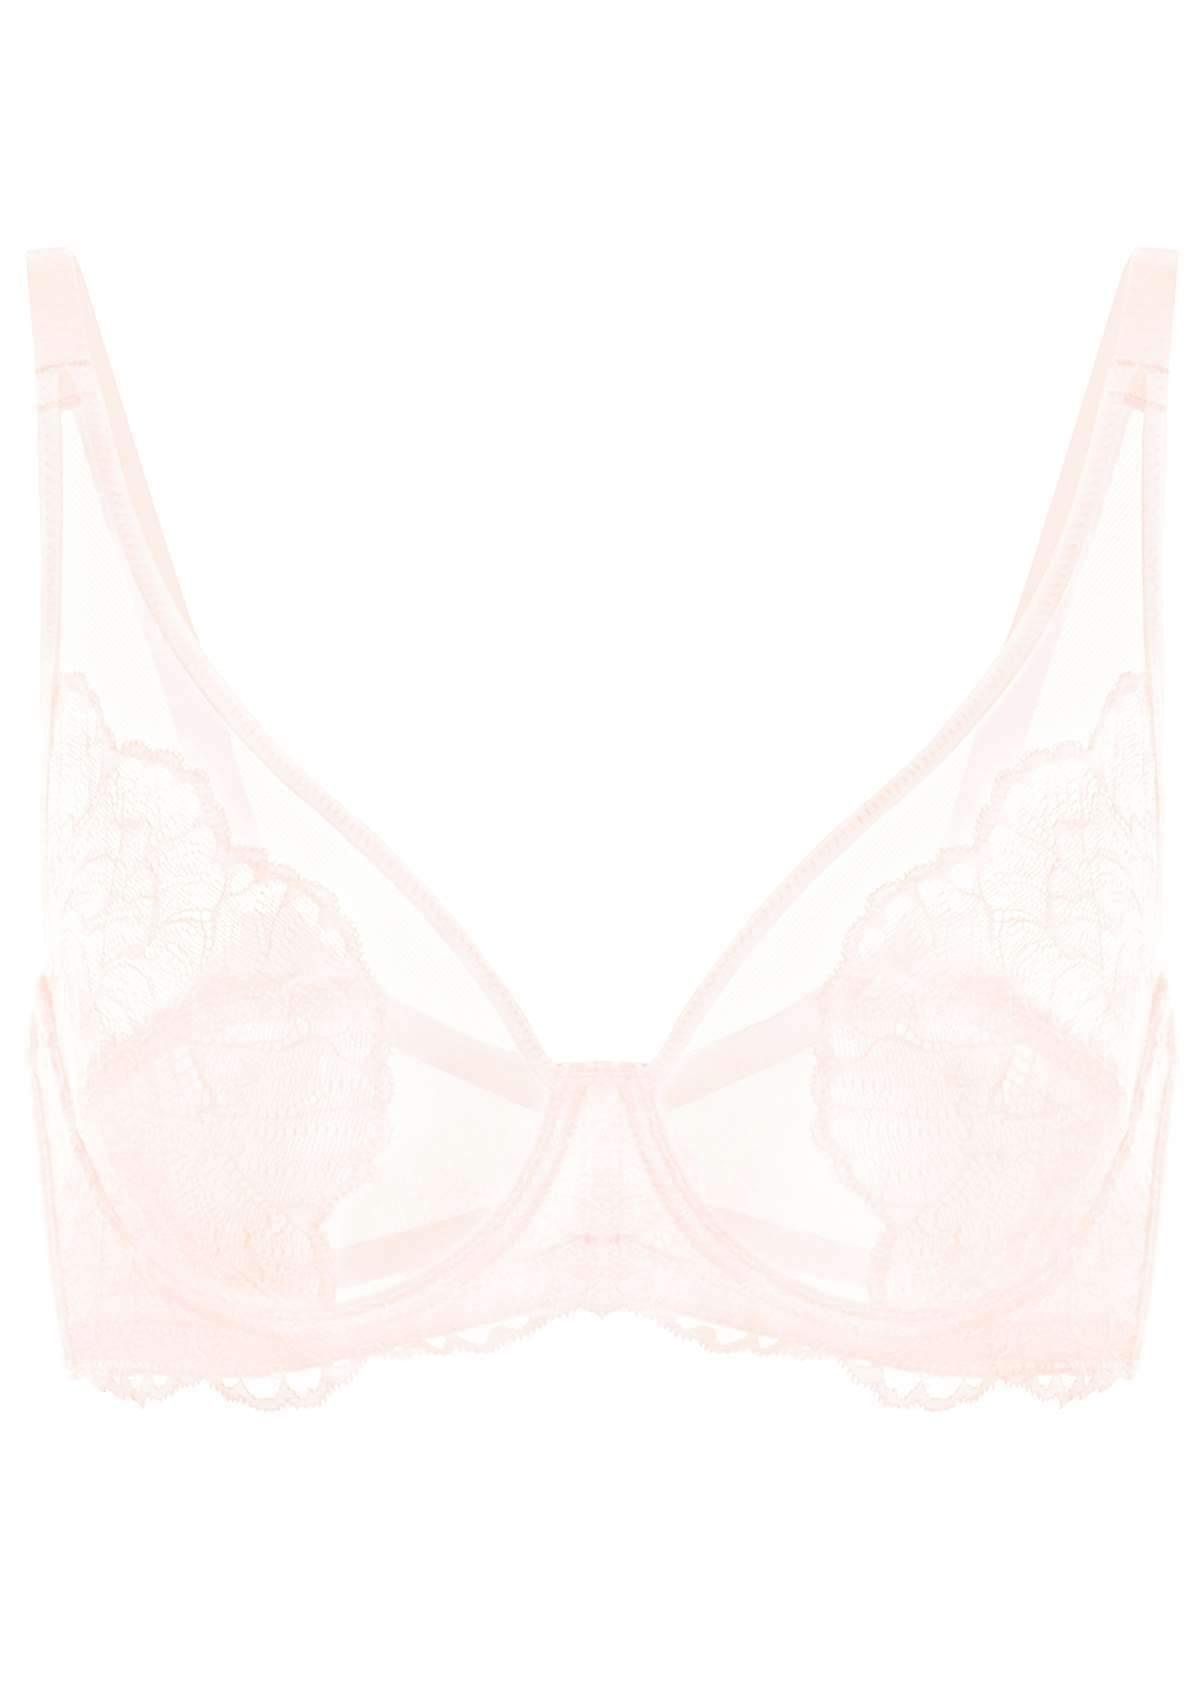 HSIA Blossom Sheer Lace Bra: Comfortable Underwire Bra For Big Busts - White / 36 / I